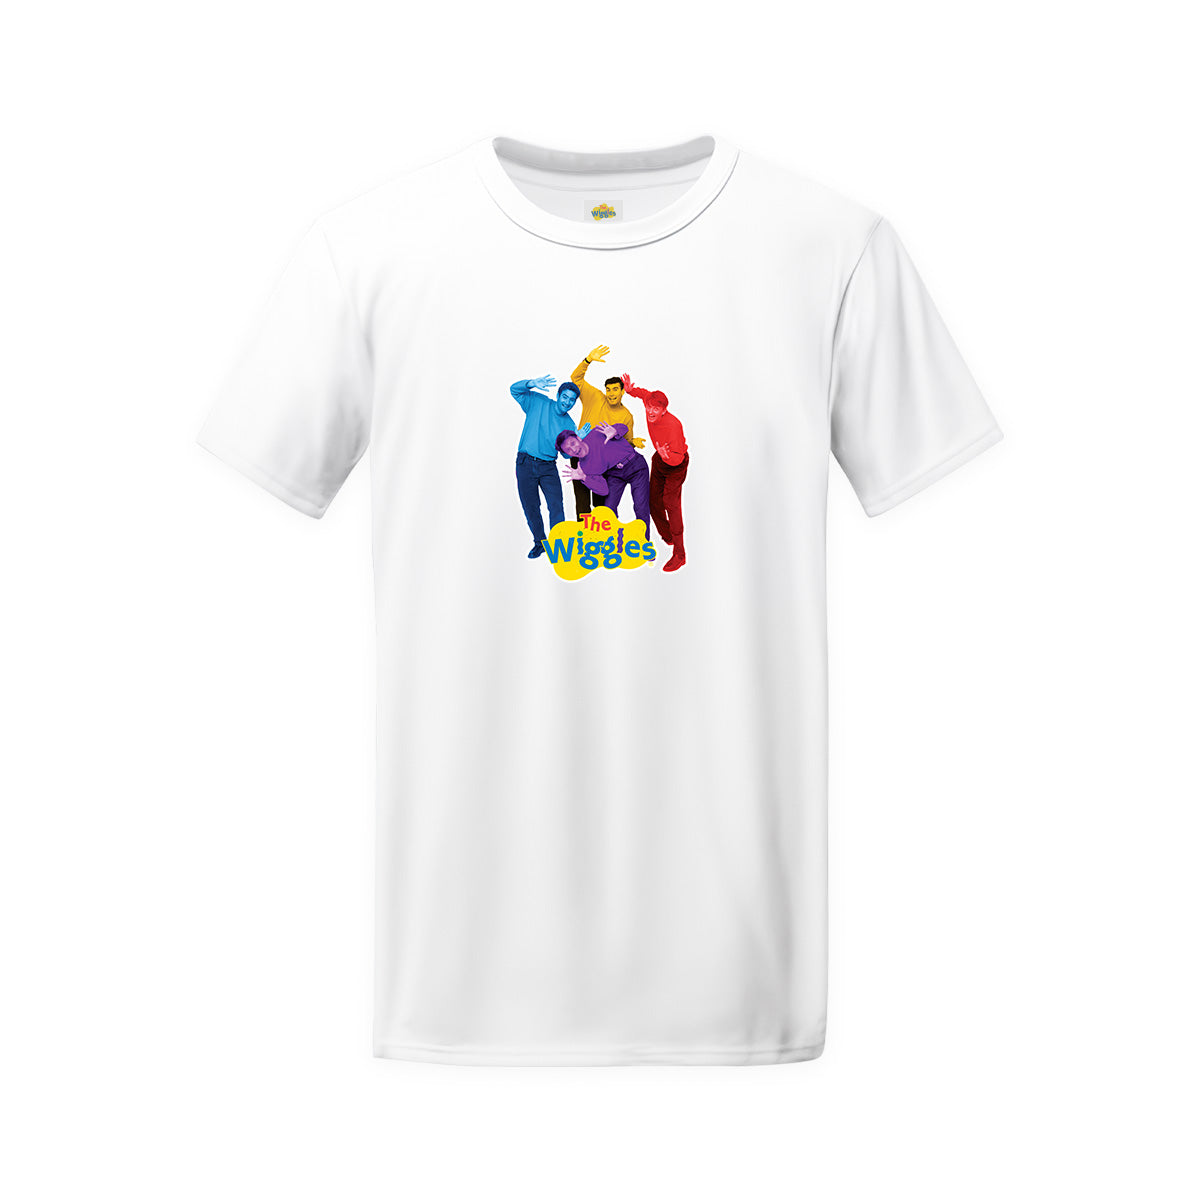 The Wiggles Adult Original Friends Casual T-shirt